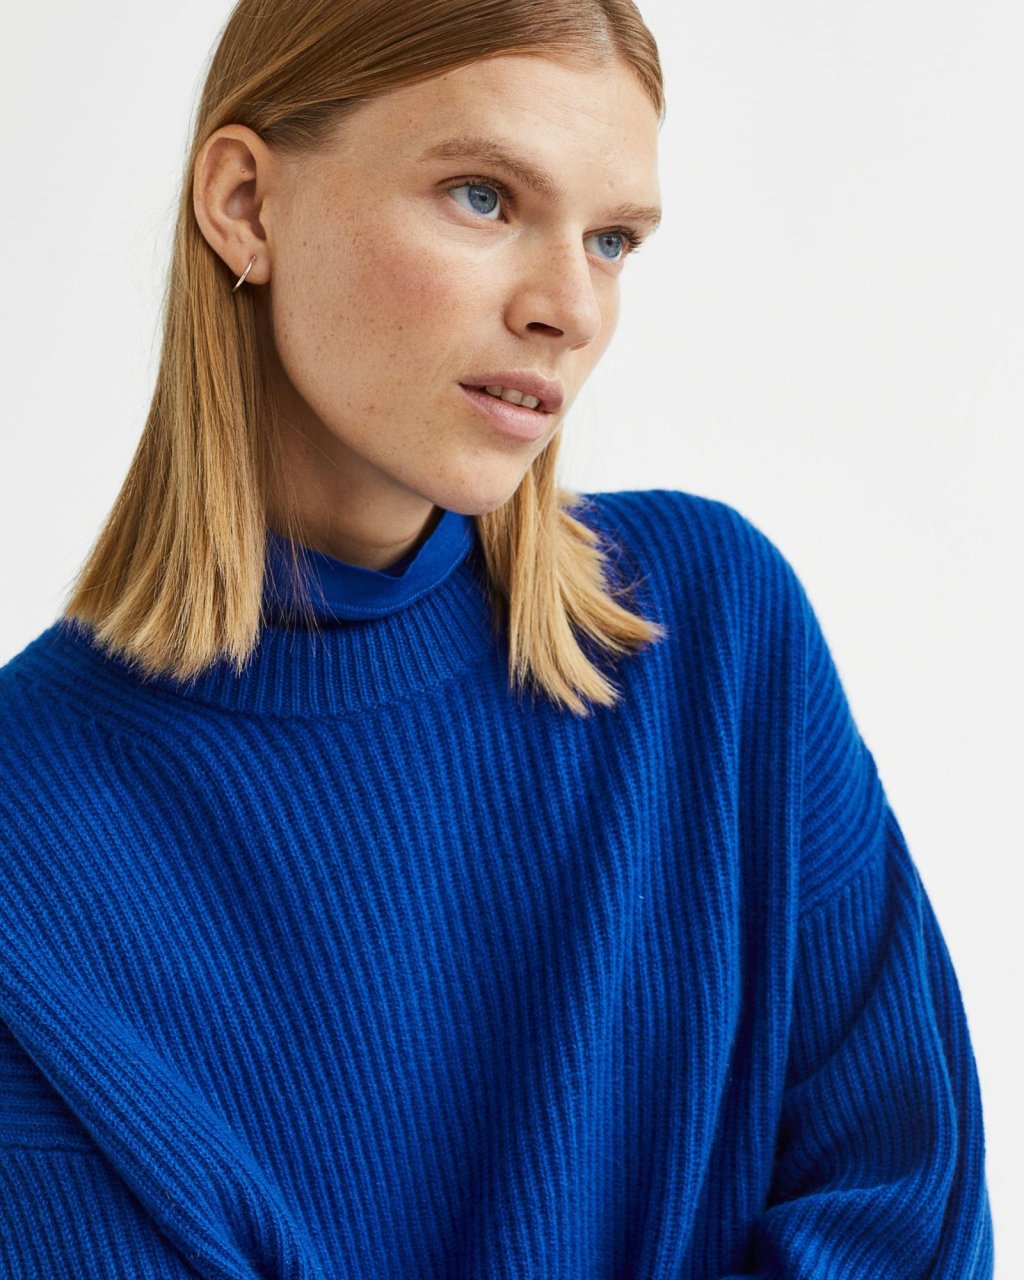 Where To Buy High Quality Affordable Cashmere On The High Street